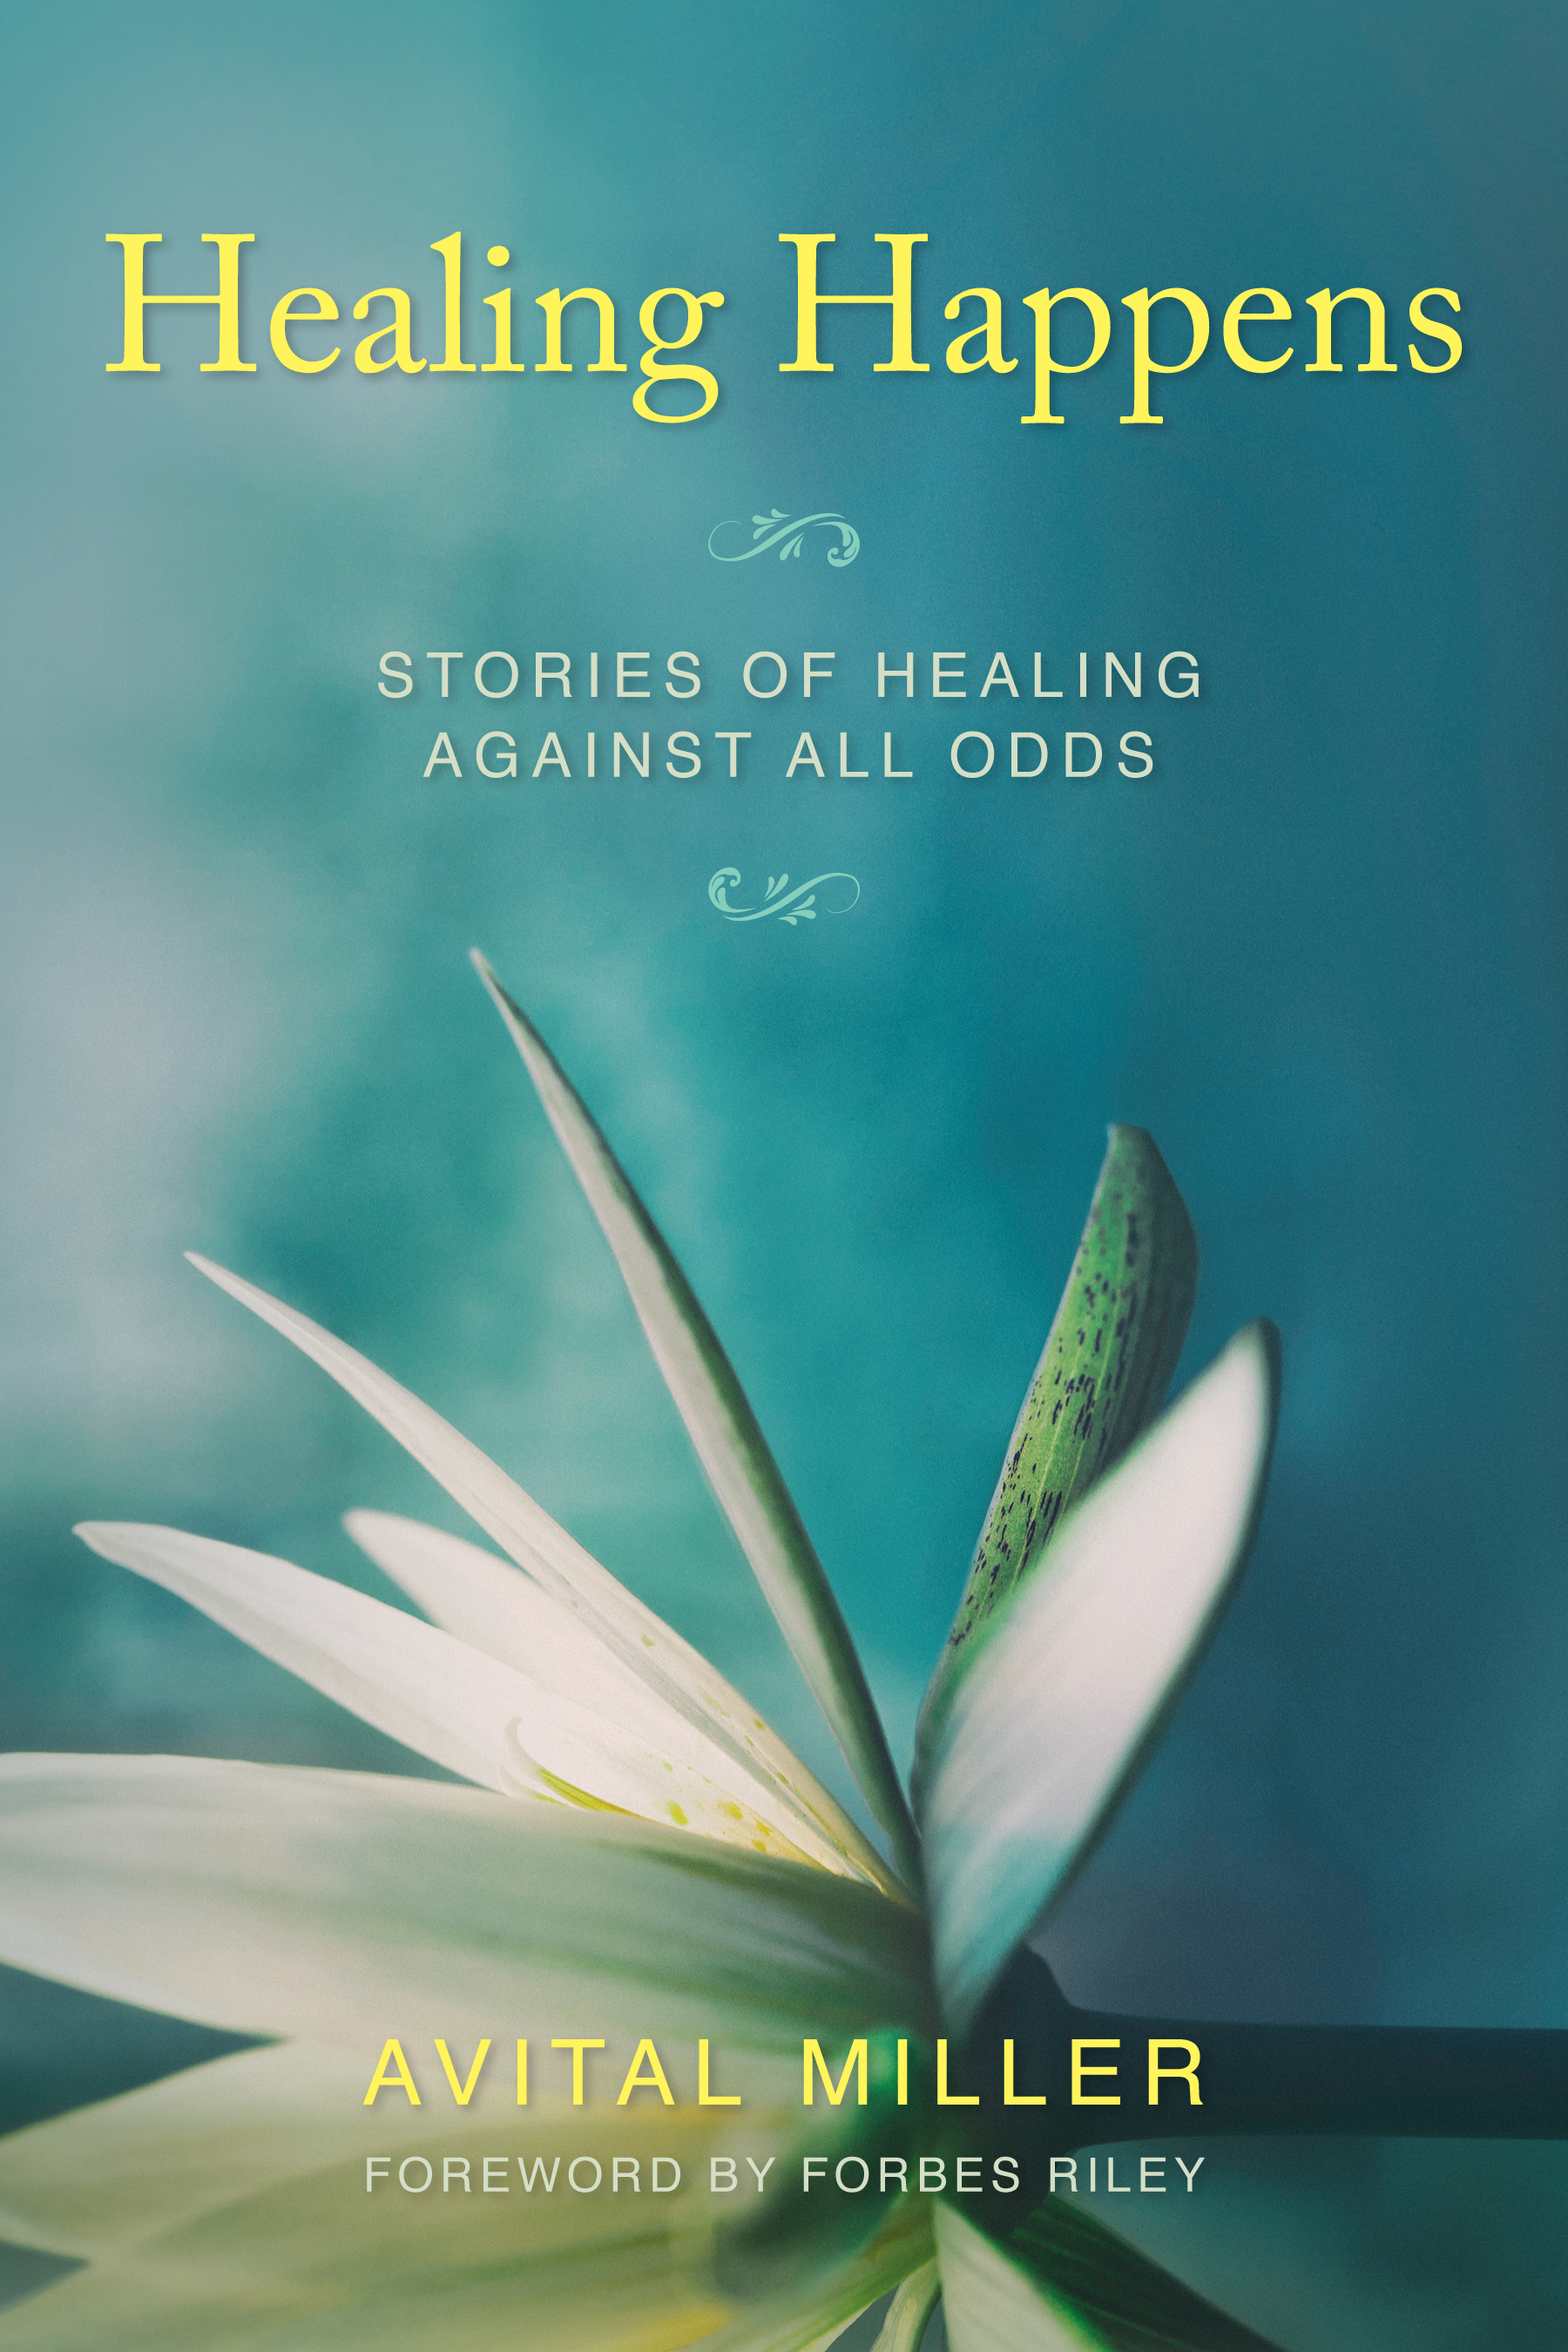 FREE: Healing Happens: Stories of Healing Against All Odds by Avital Miller